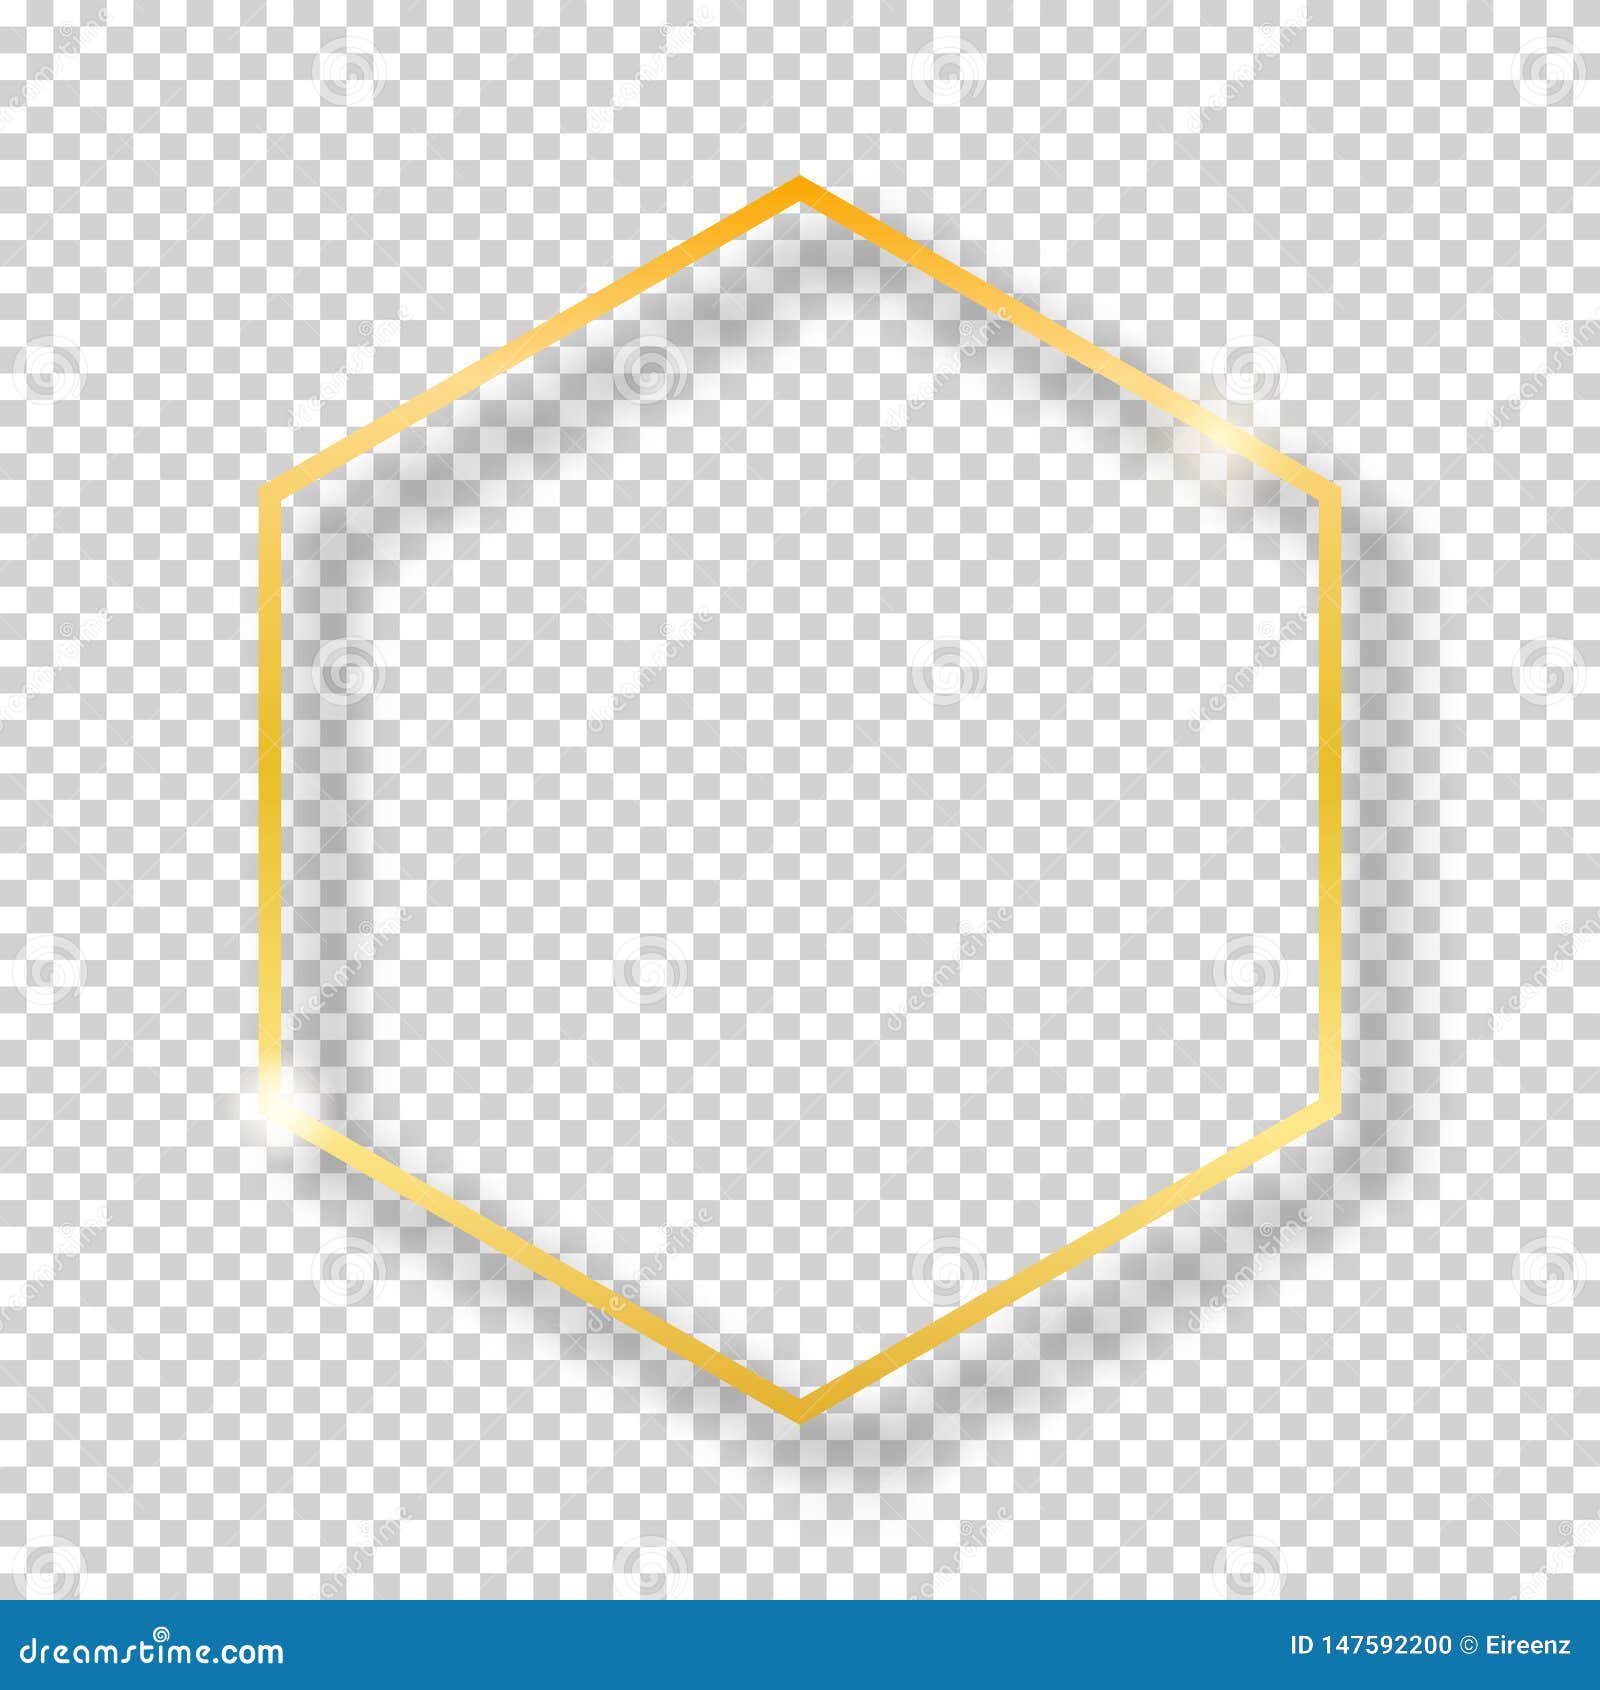 Download Vector Golden Shiny Vintage Hexagon Frame Isolated On ...